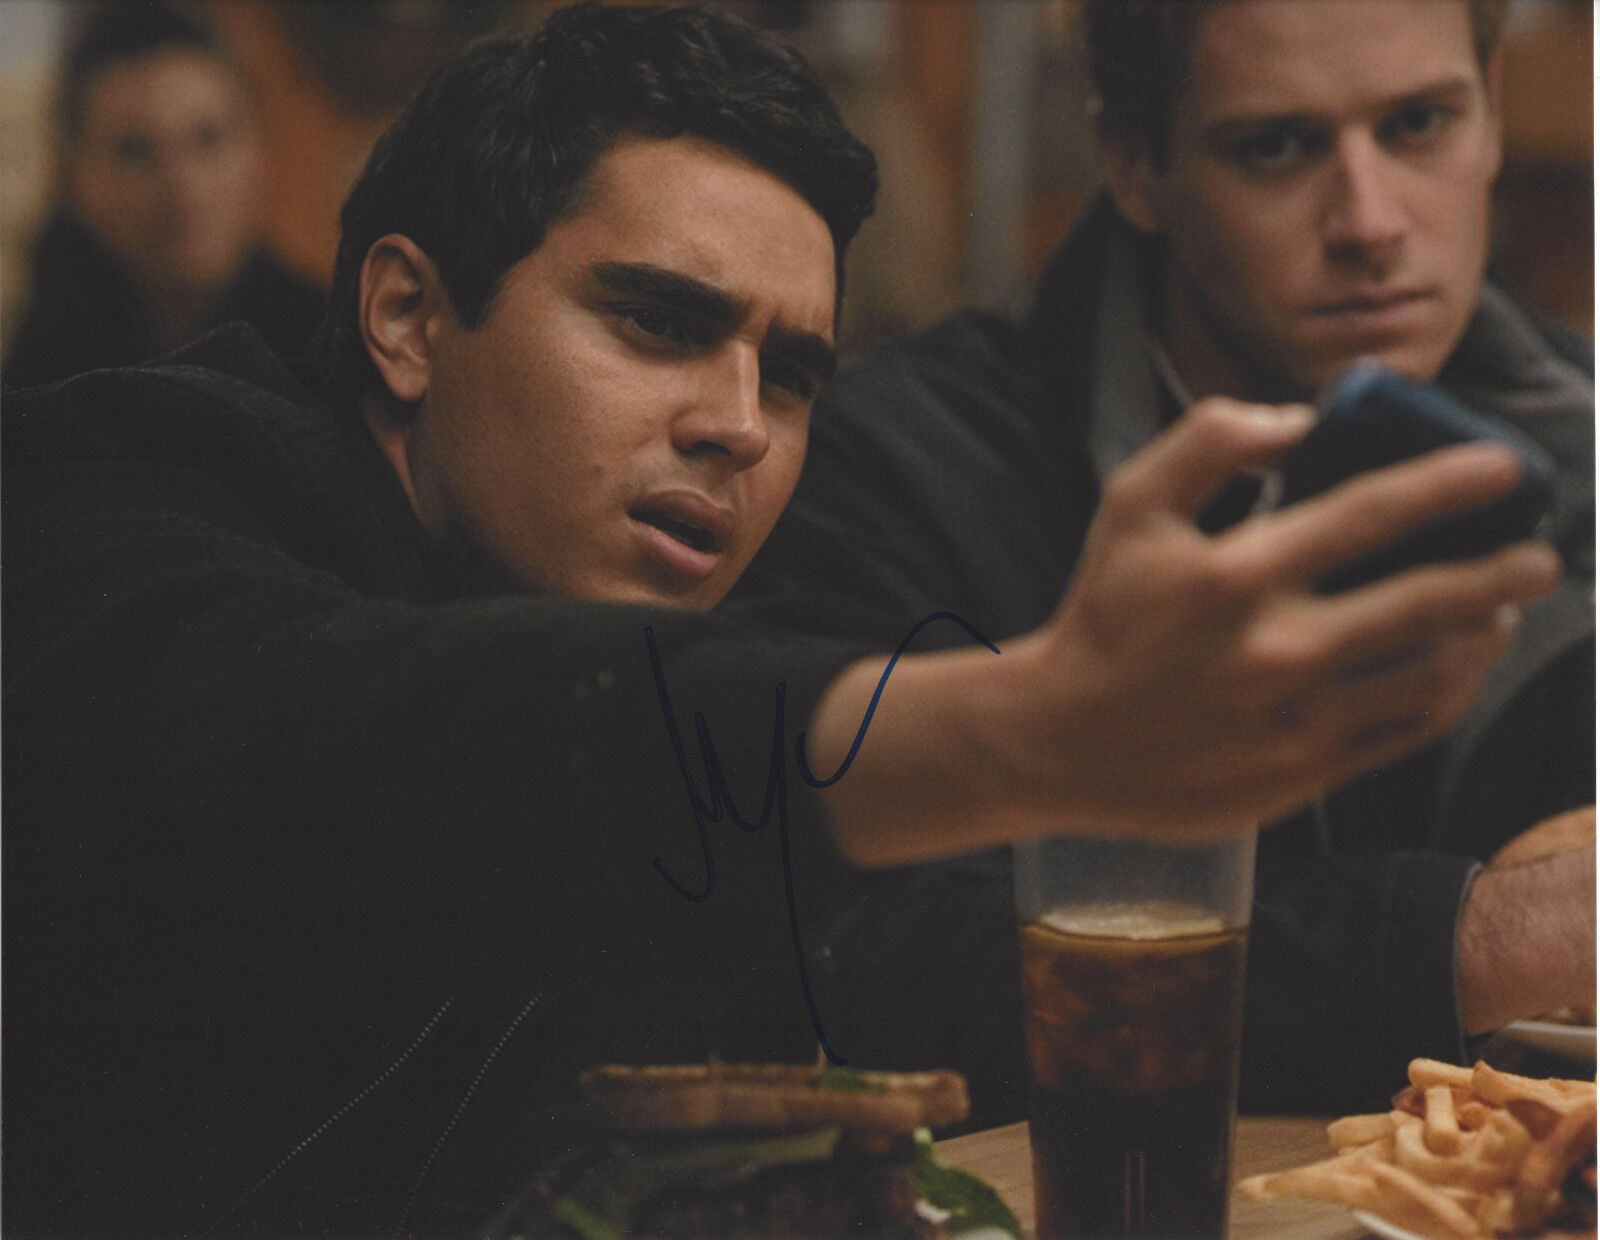 MAX MINGHELLA SIGNED AUTHENTIC 'THE SOCIAL NETWORK' 8X10 Photo Poster painting B w/COA ACTOR